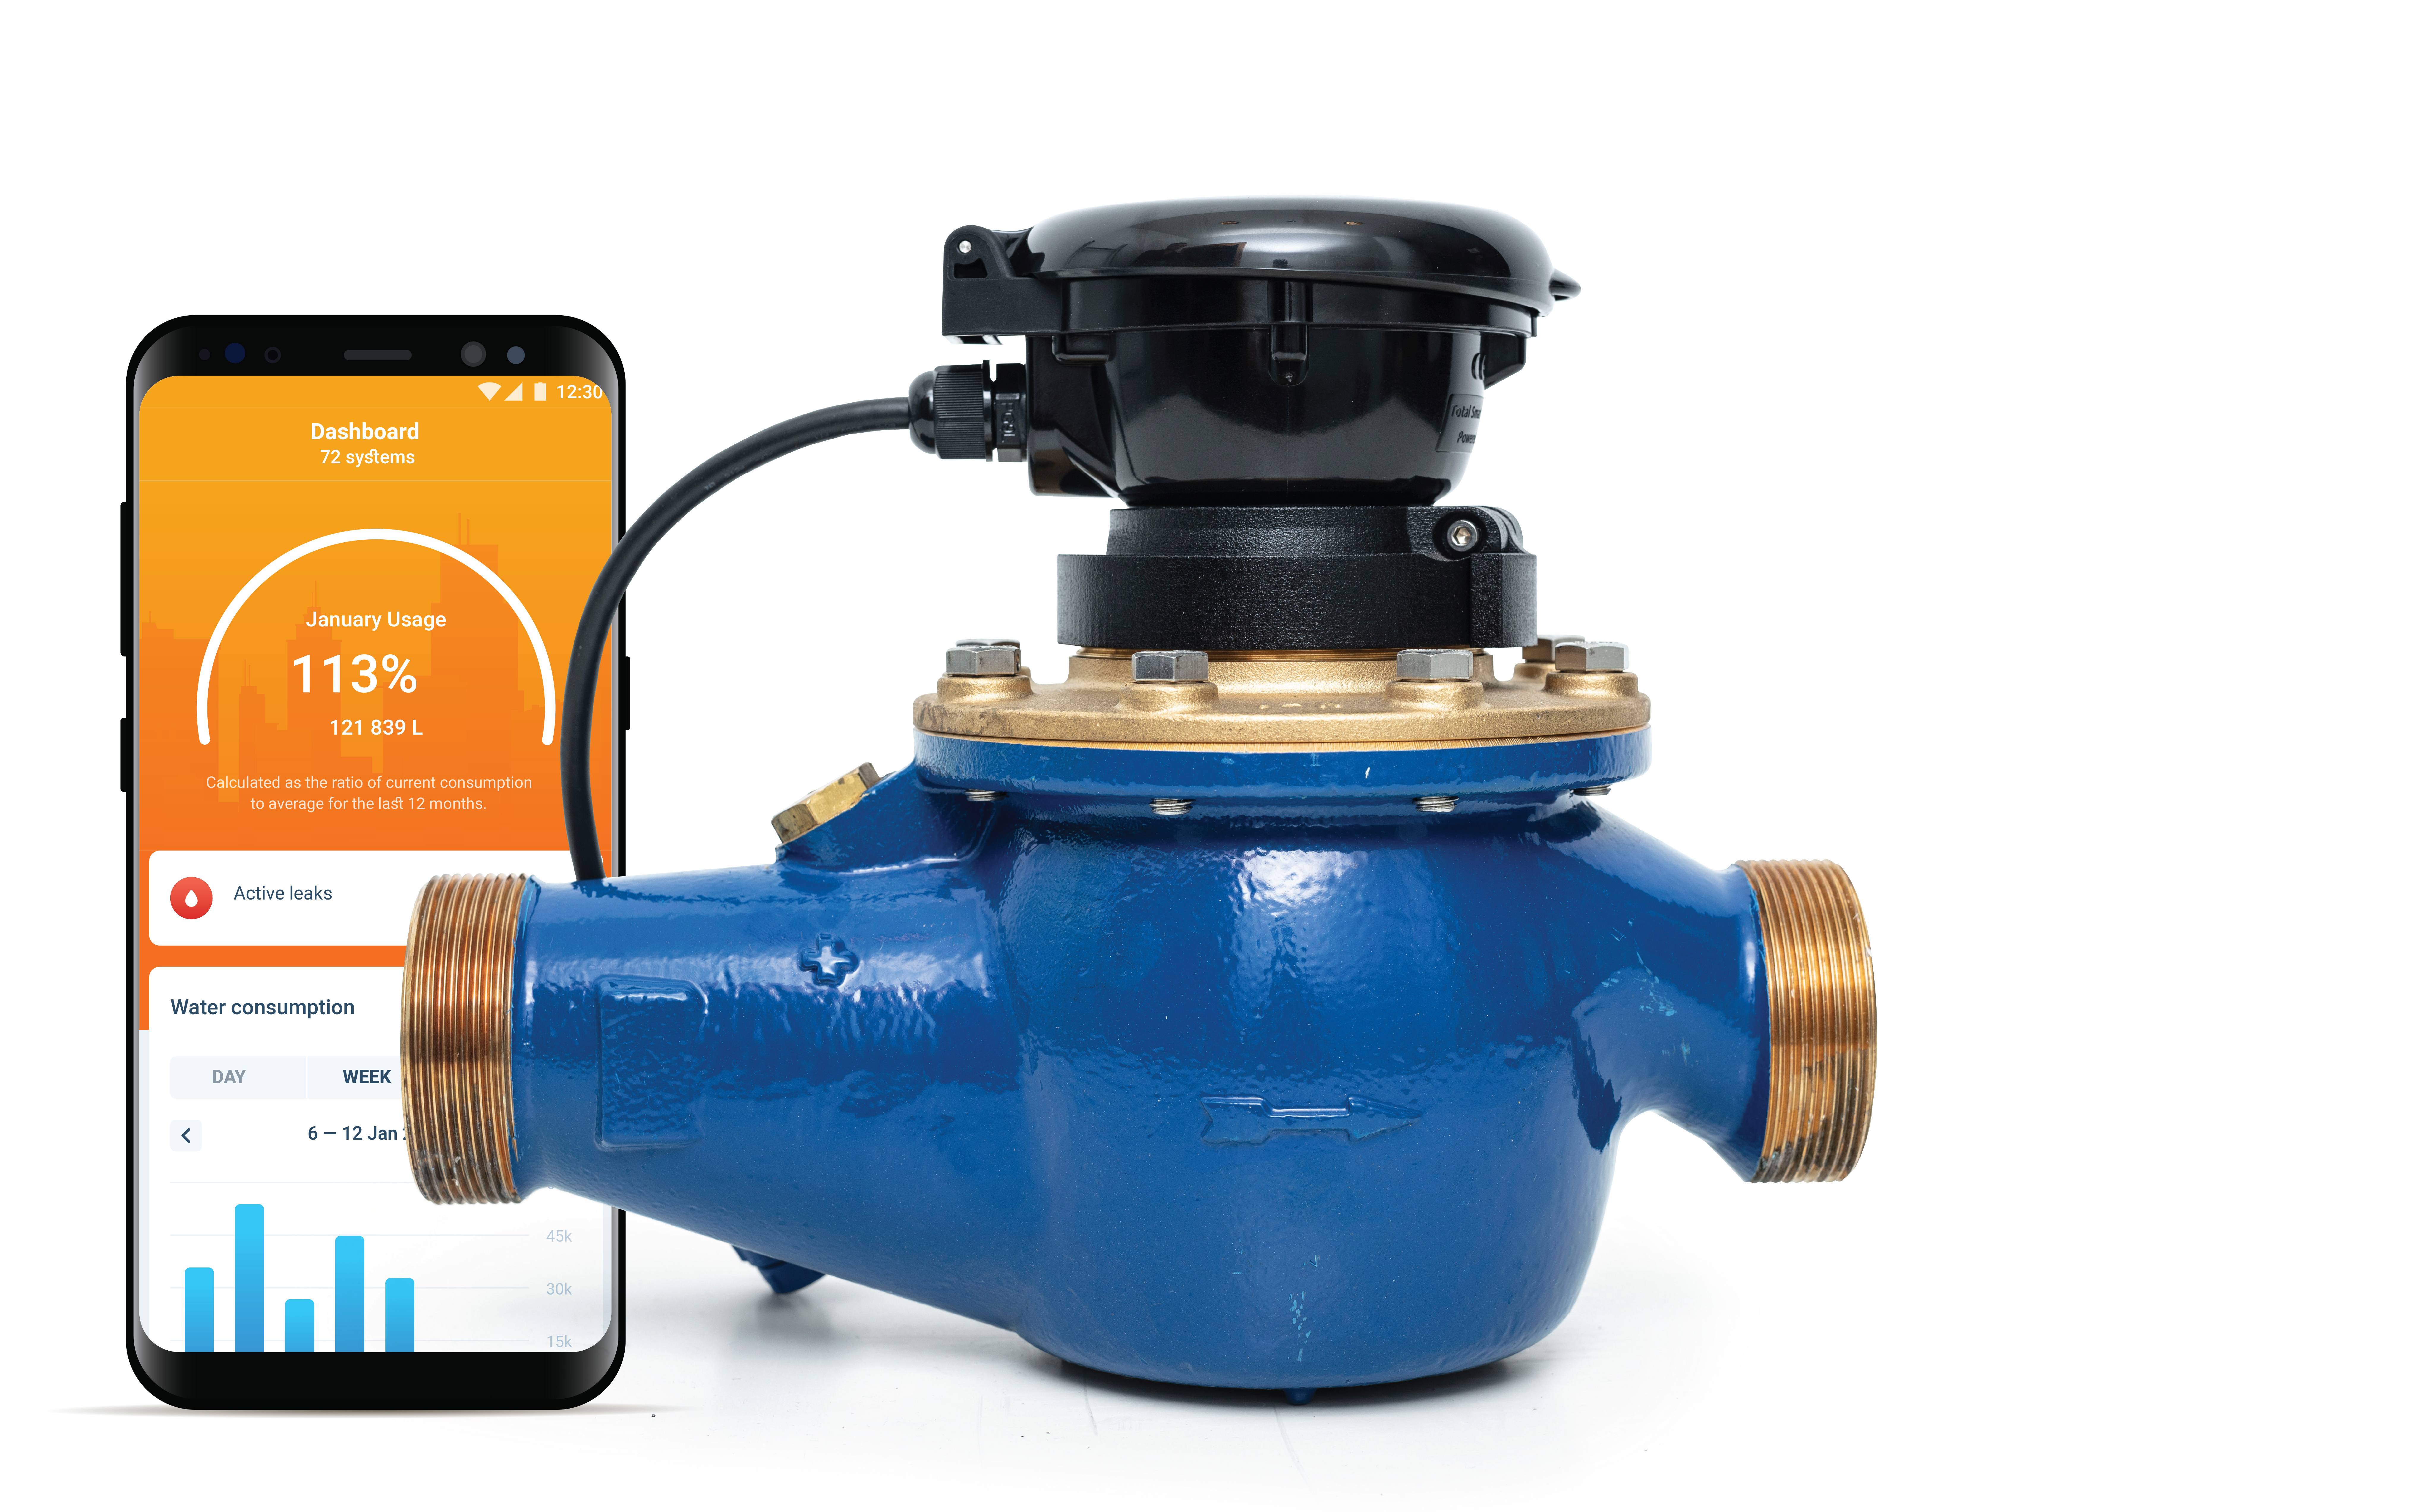 Here's a great article about WINT - Water Intelligence and how WINT is used across Israel to save water and prevent water leak damage. And how m...